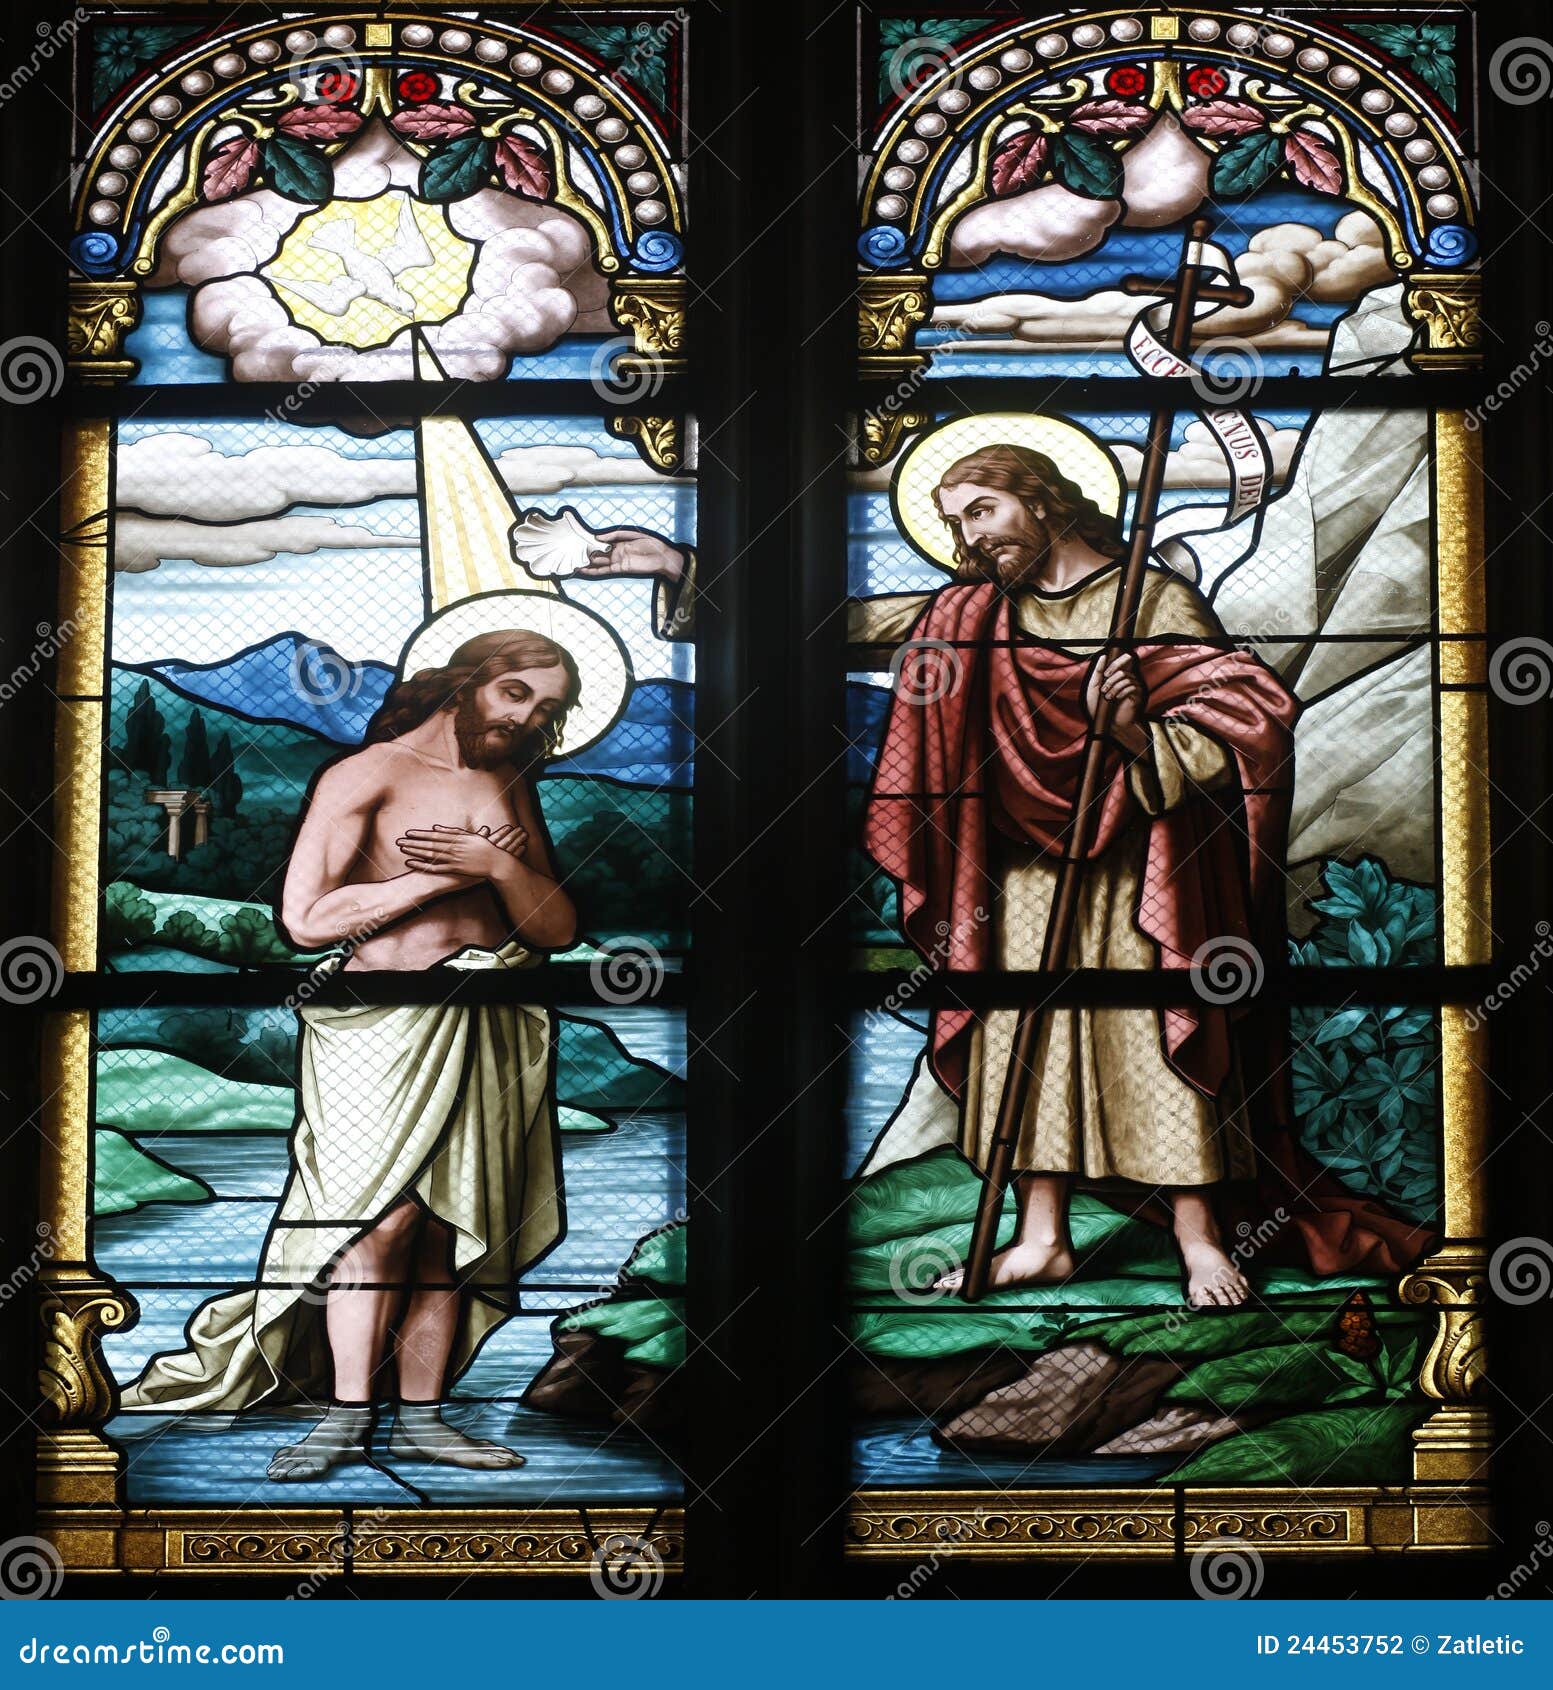 baptism of the lord clipart - photo #38